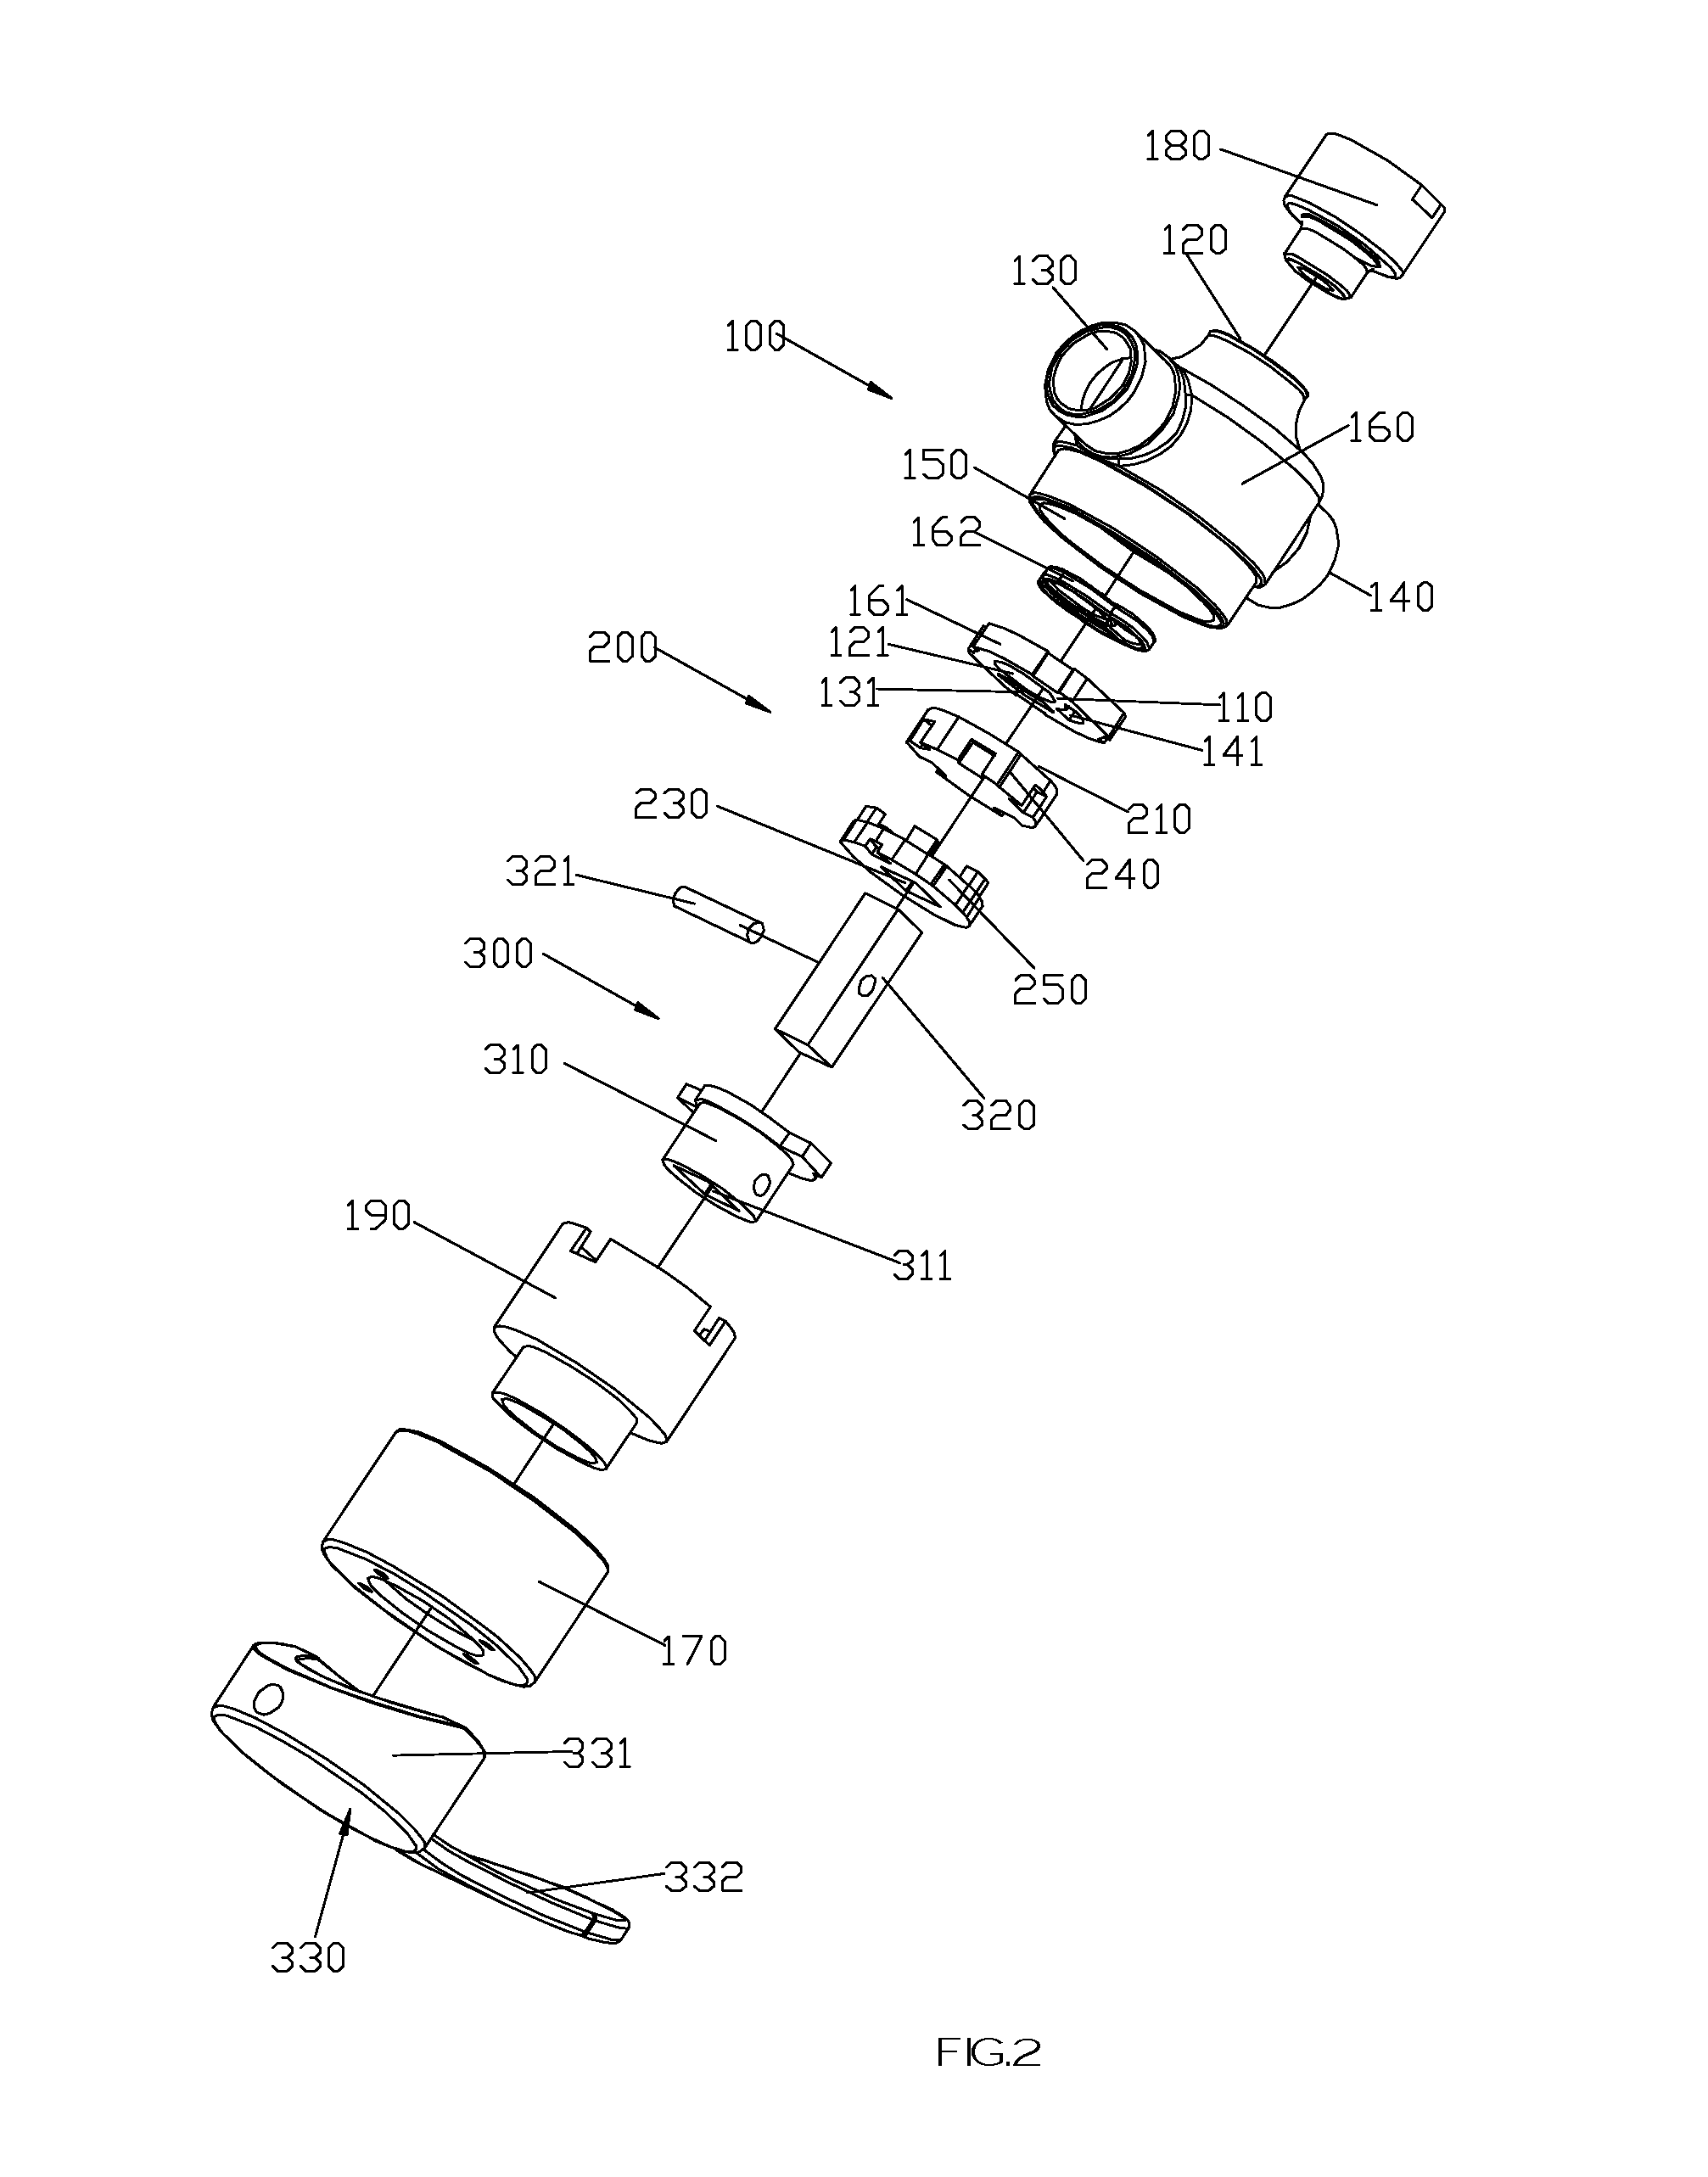 Valve for switching waterways and adjusting flow